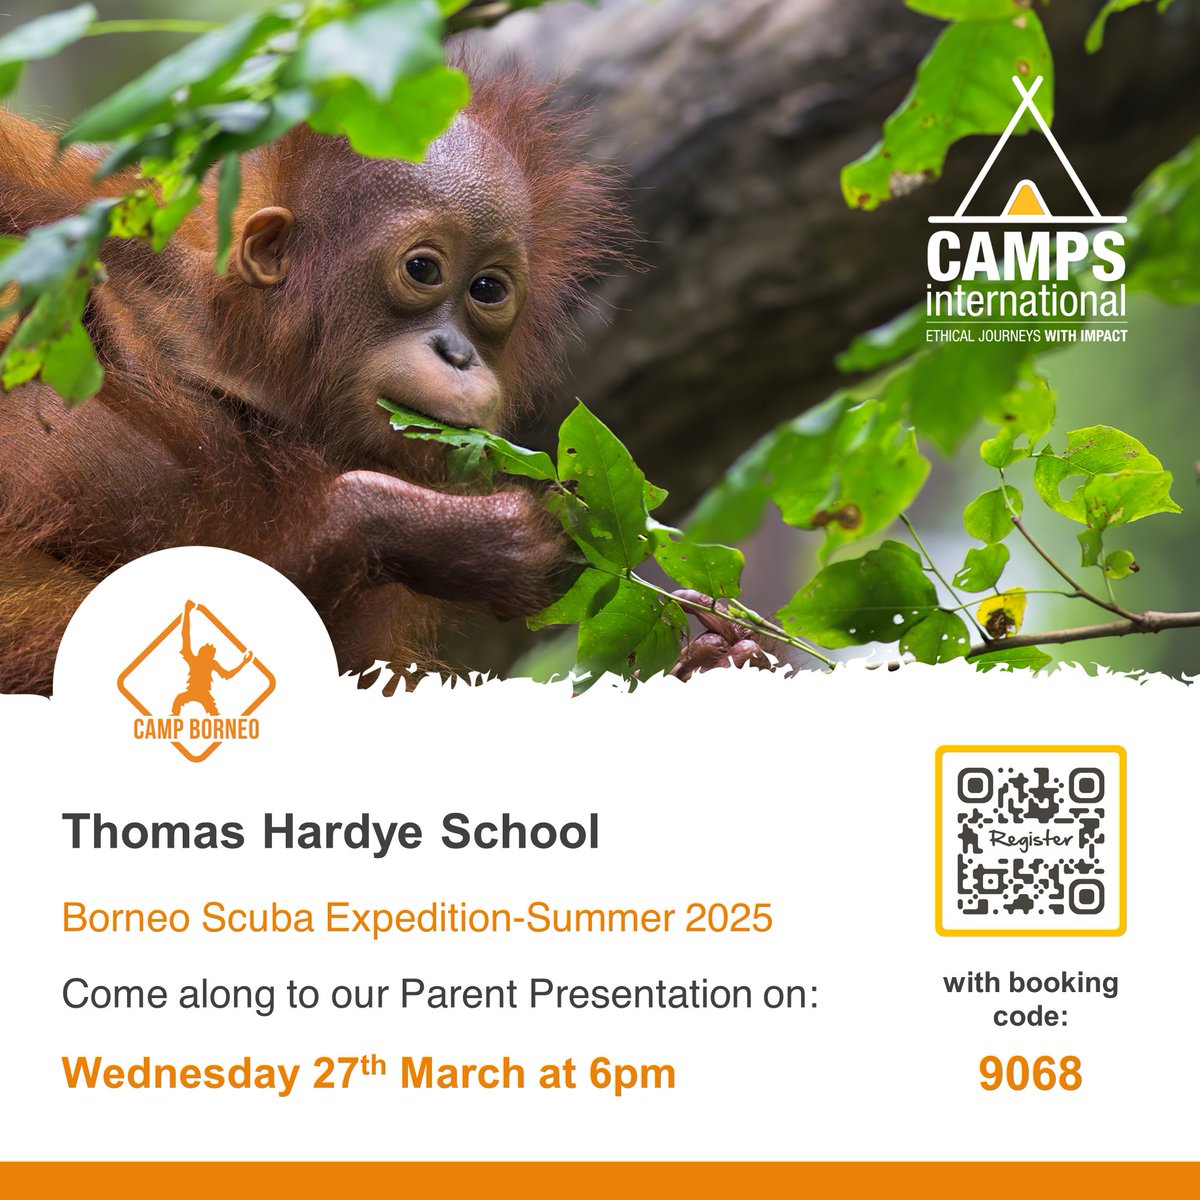 All parents / carers of students in yrs 9 - 12 are welcome to a school presentation about the @CampsInt Scuba Expedition Summer 2025 on Wed 27th March 6pm. Trip costs will be raised through fundraising supported by THS & Camps International. Pre-register via QR with code 9068.